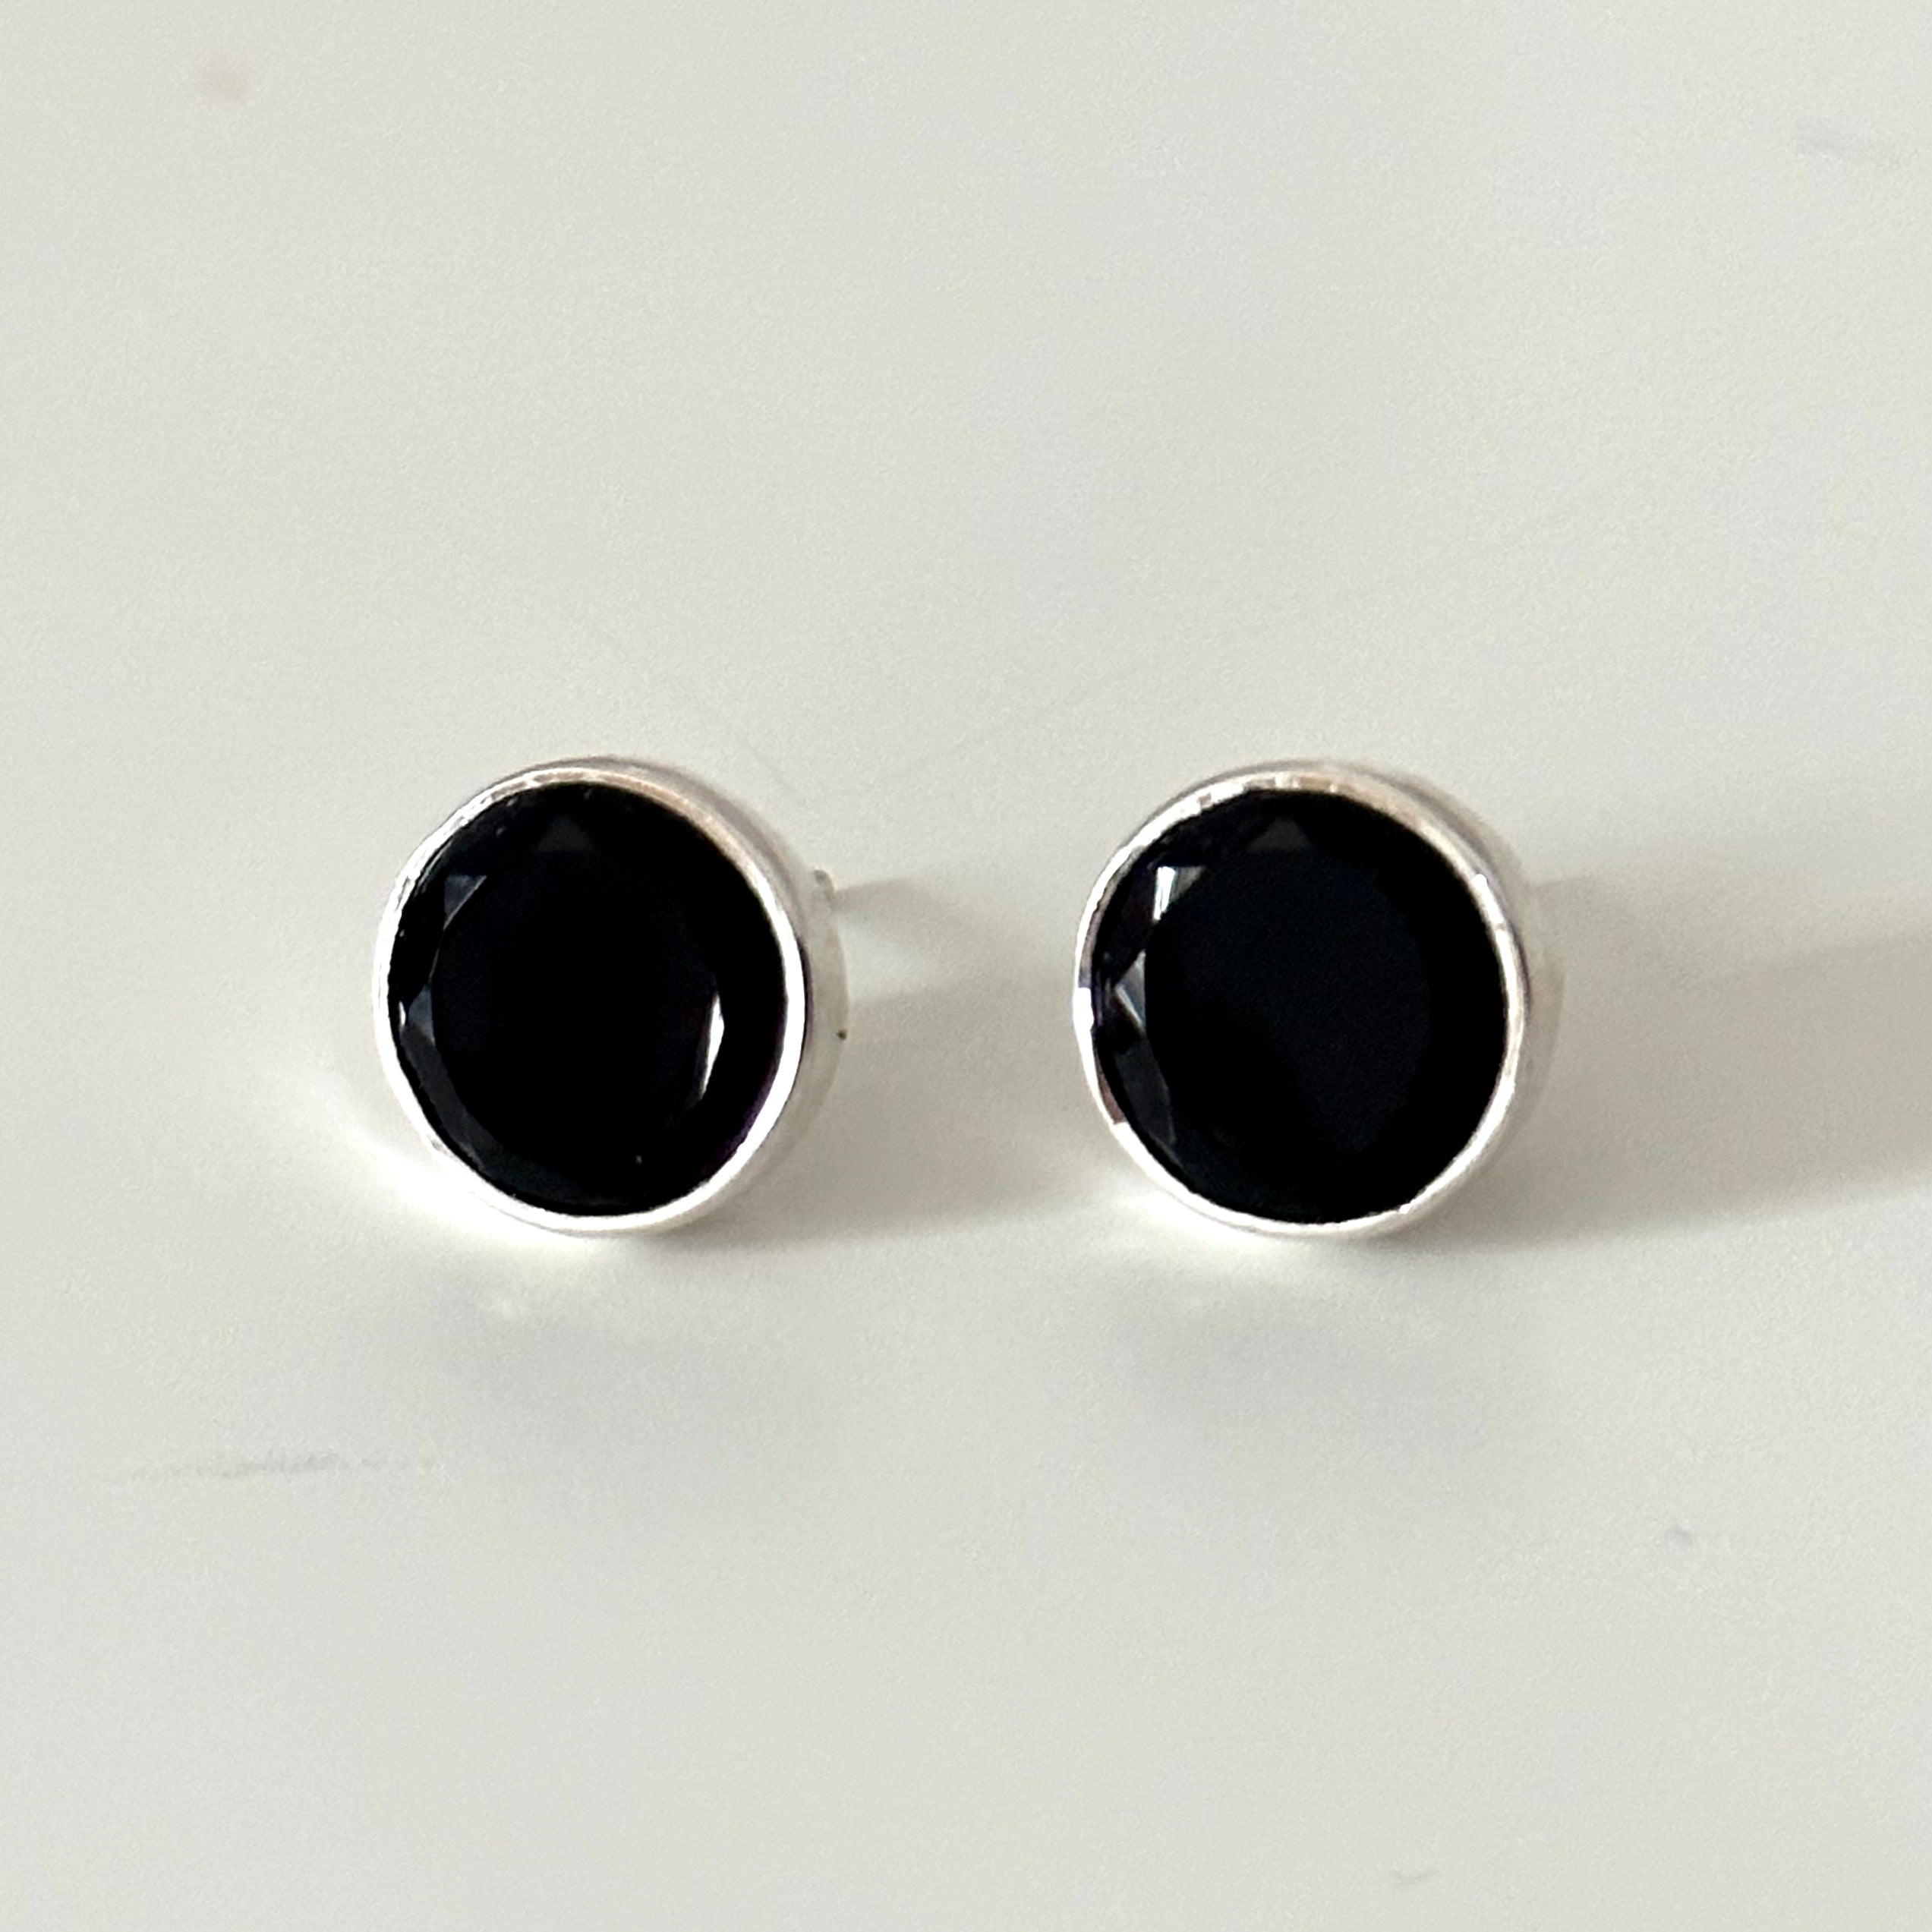 Black Onyx Studs in Sterling Silver with a Round Faceted Gemstone - Milina London